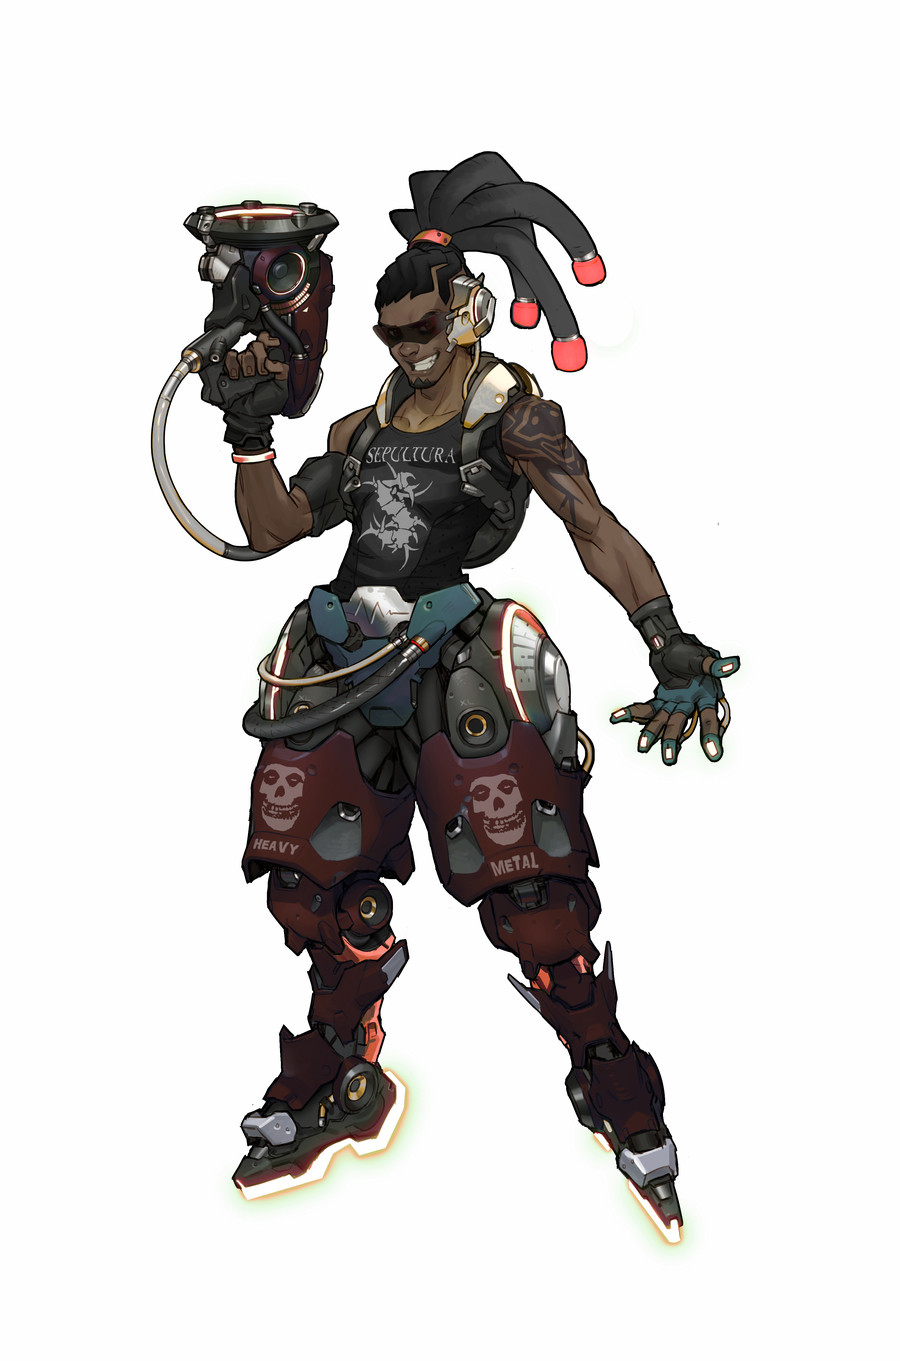 Metal Lúcio. Wouldn't it be nice to have different music styles skins for Lúcio? As a metalhead myself I thought of this one. Lemme know what you think. Also if